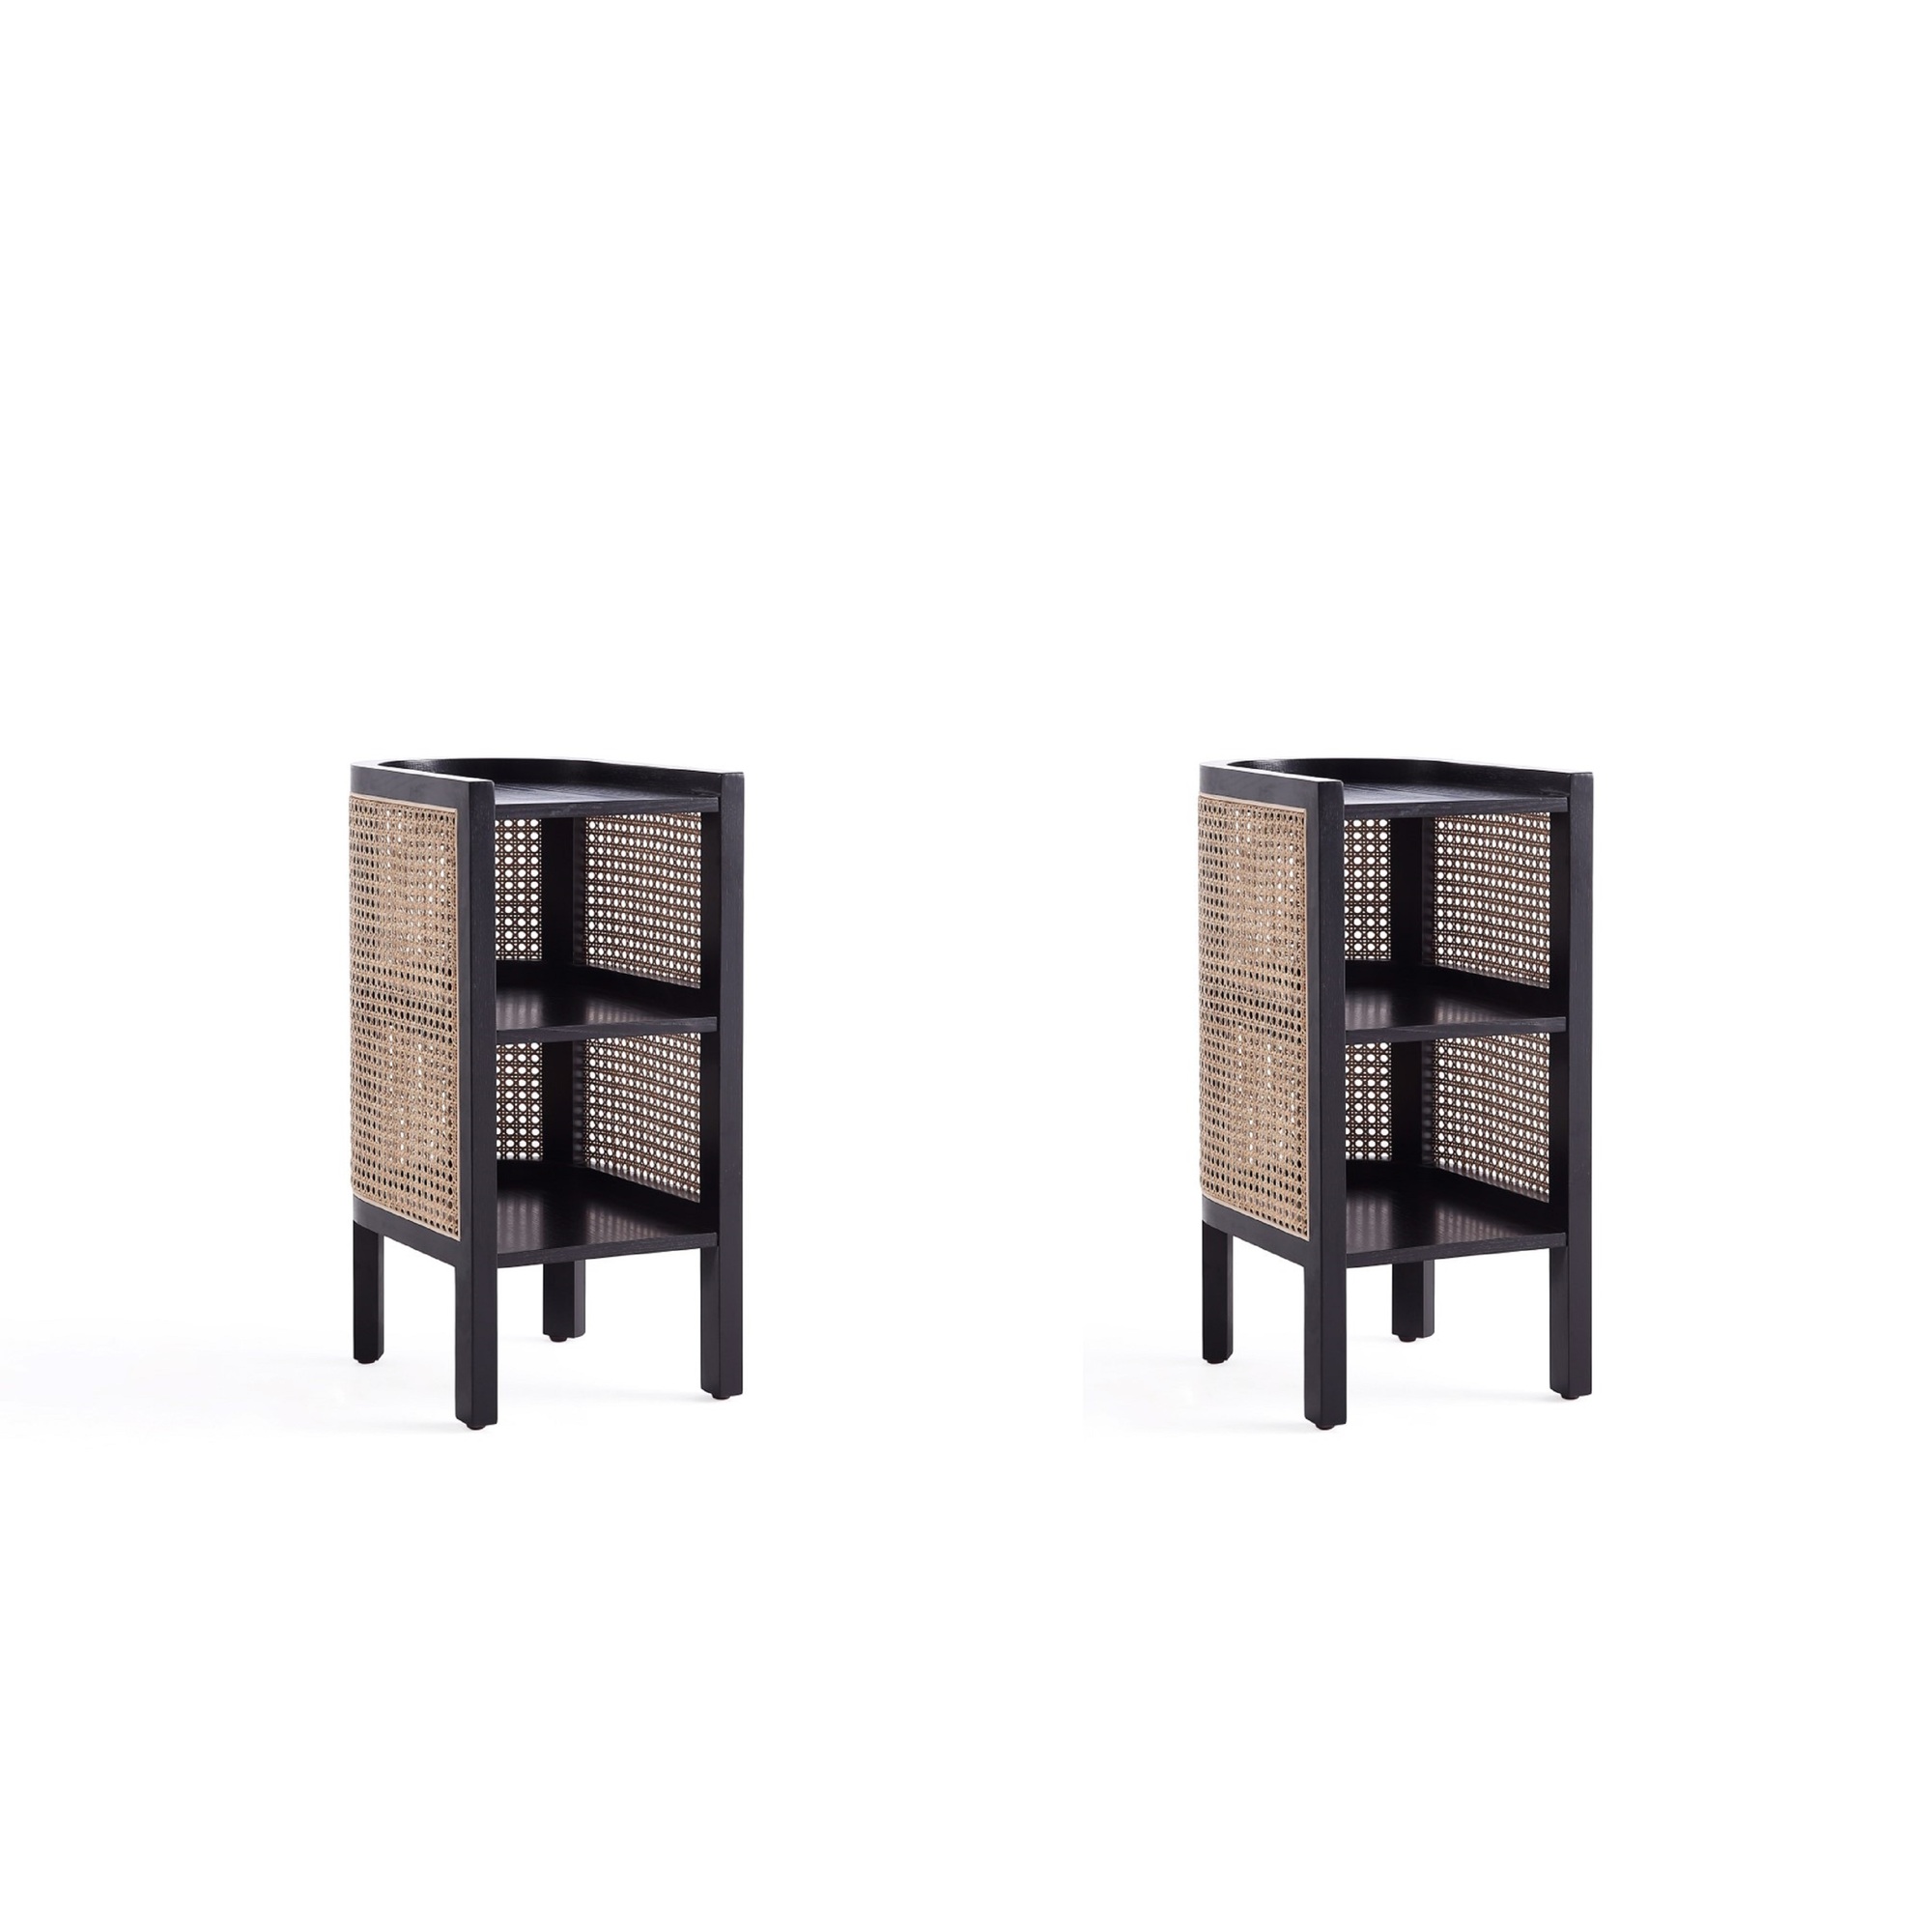 Manhattan Comfort, Versailles End Table Black and Cane Set of 2 Width 11.81 in, Height 24.41 in, Depth 15.94 in, Model 2-NSCA01